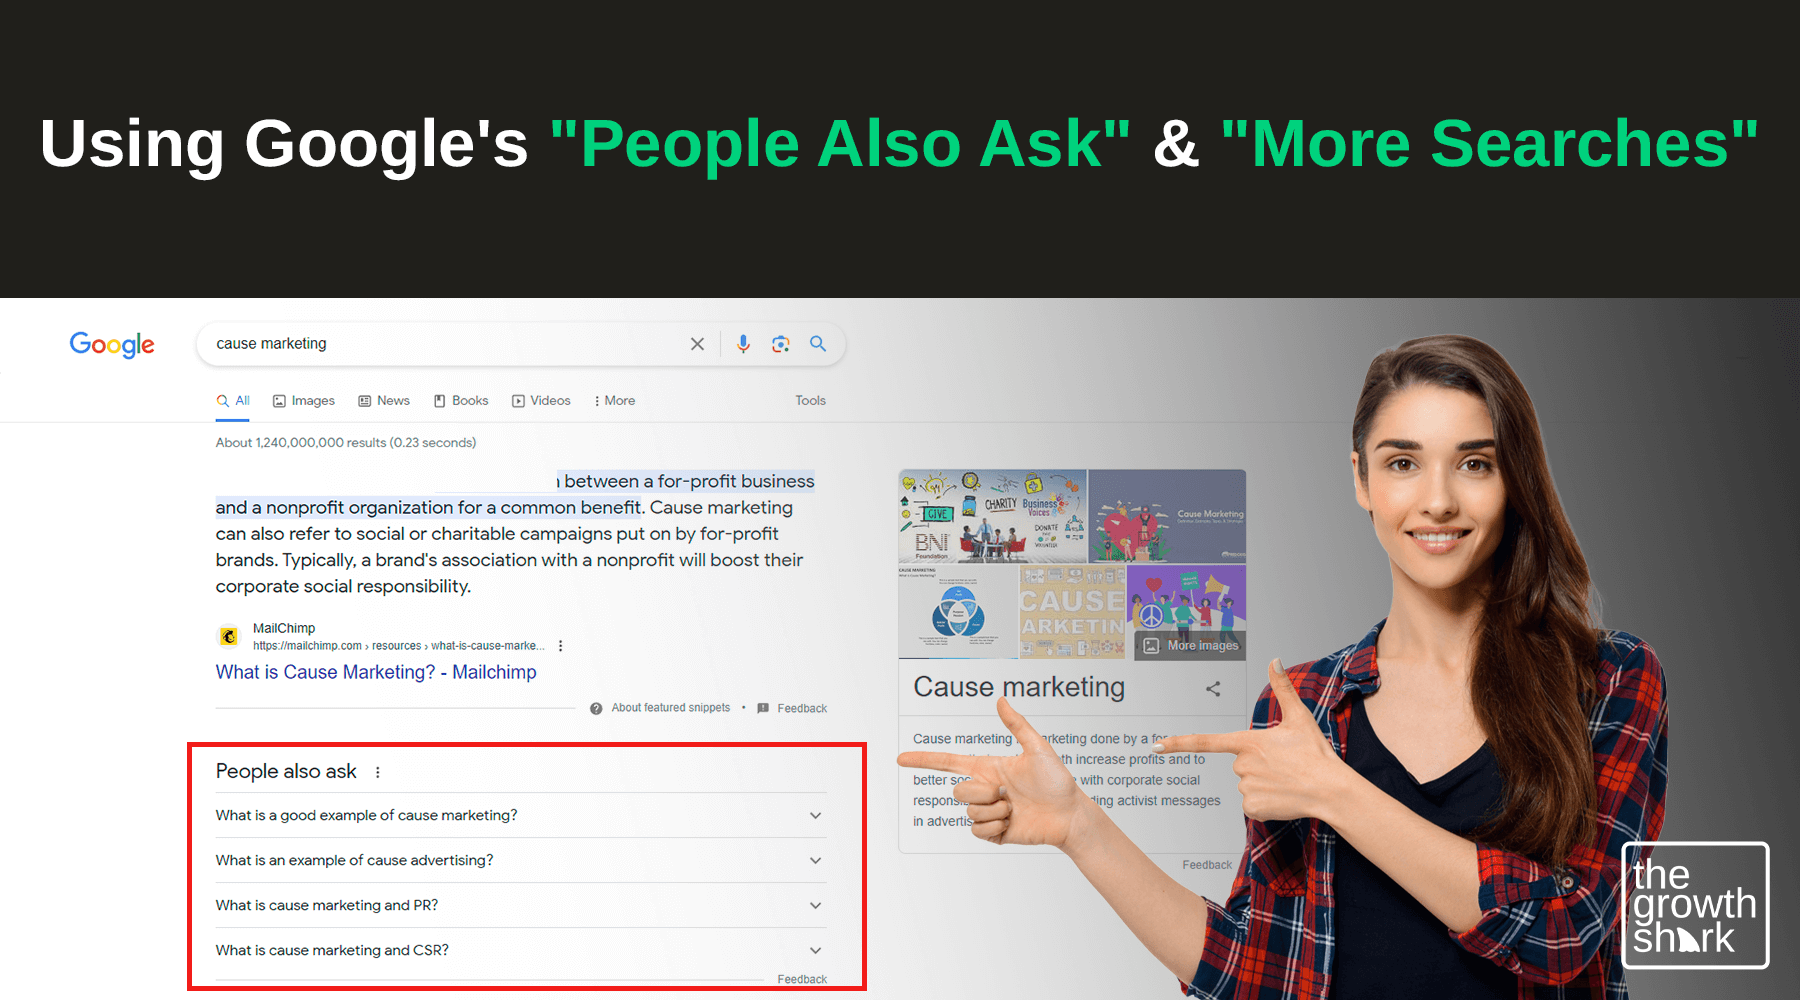 How to Use Google's "People Also Ask" & "More Searches" for Cause Marketing SEO